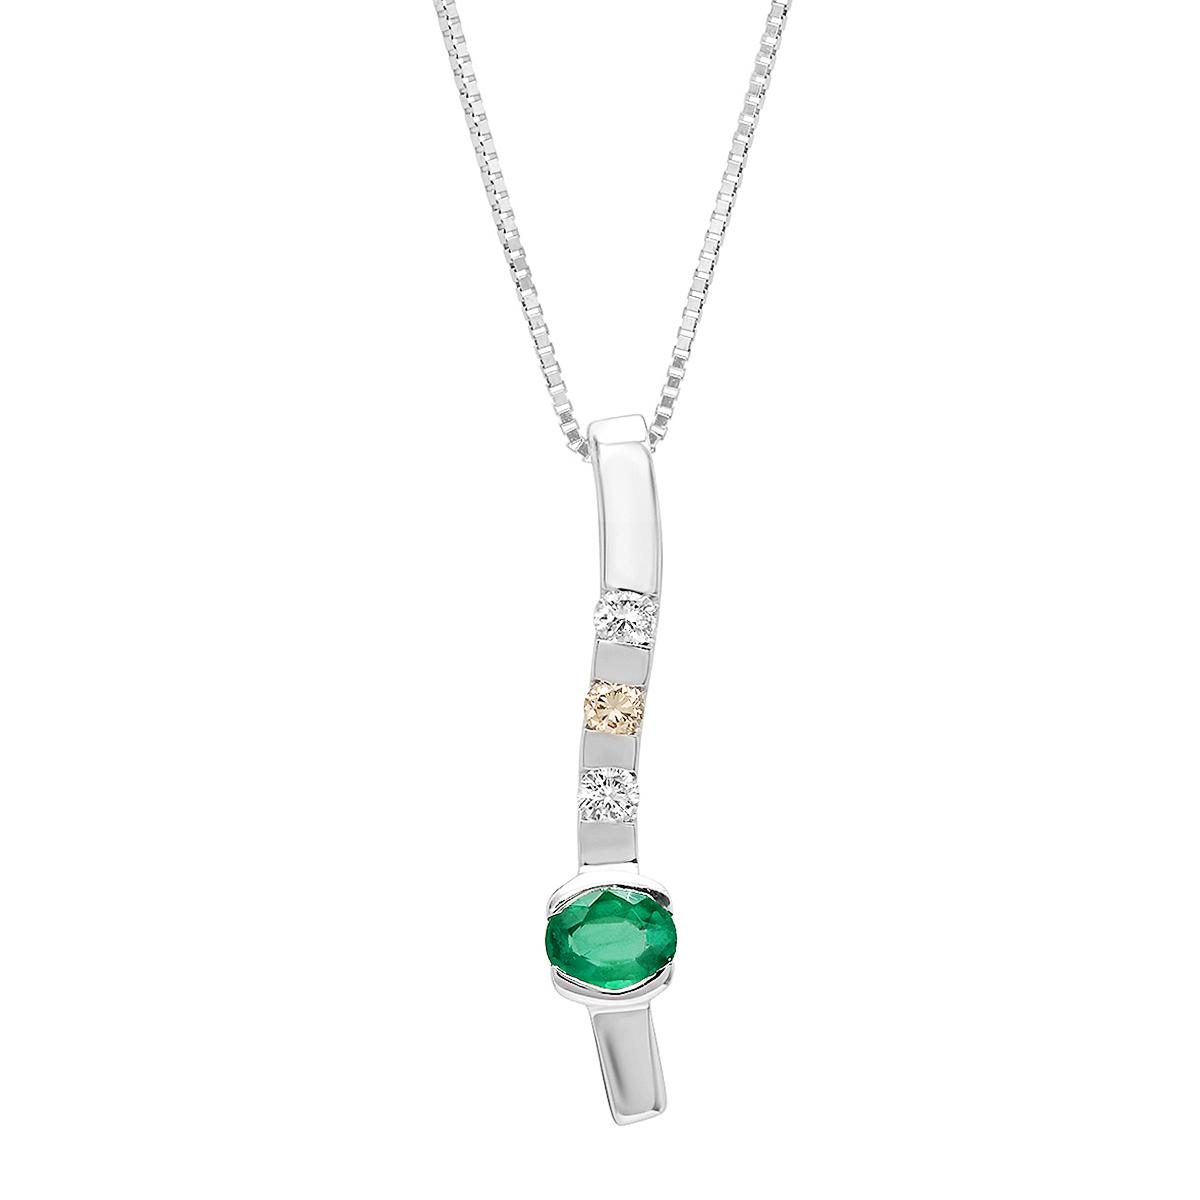 14K White Gold Soft Curved Bar Pendant with Emerald/Diamonds